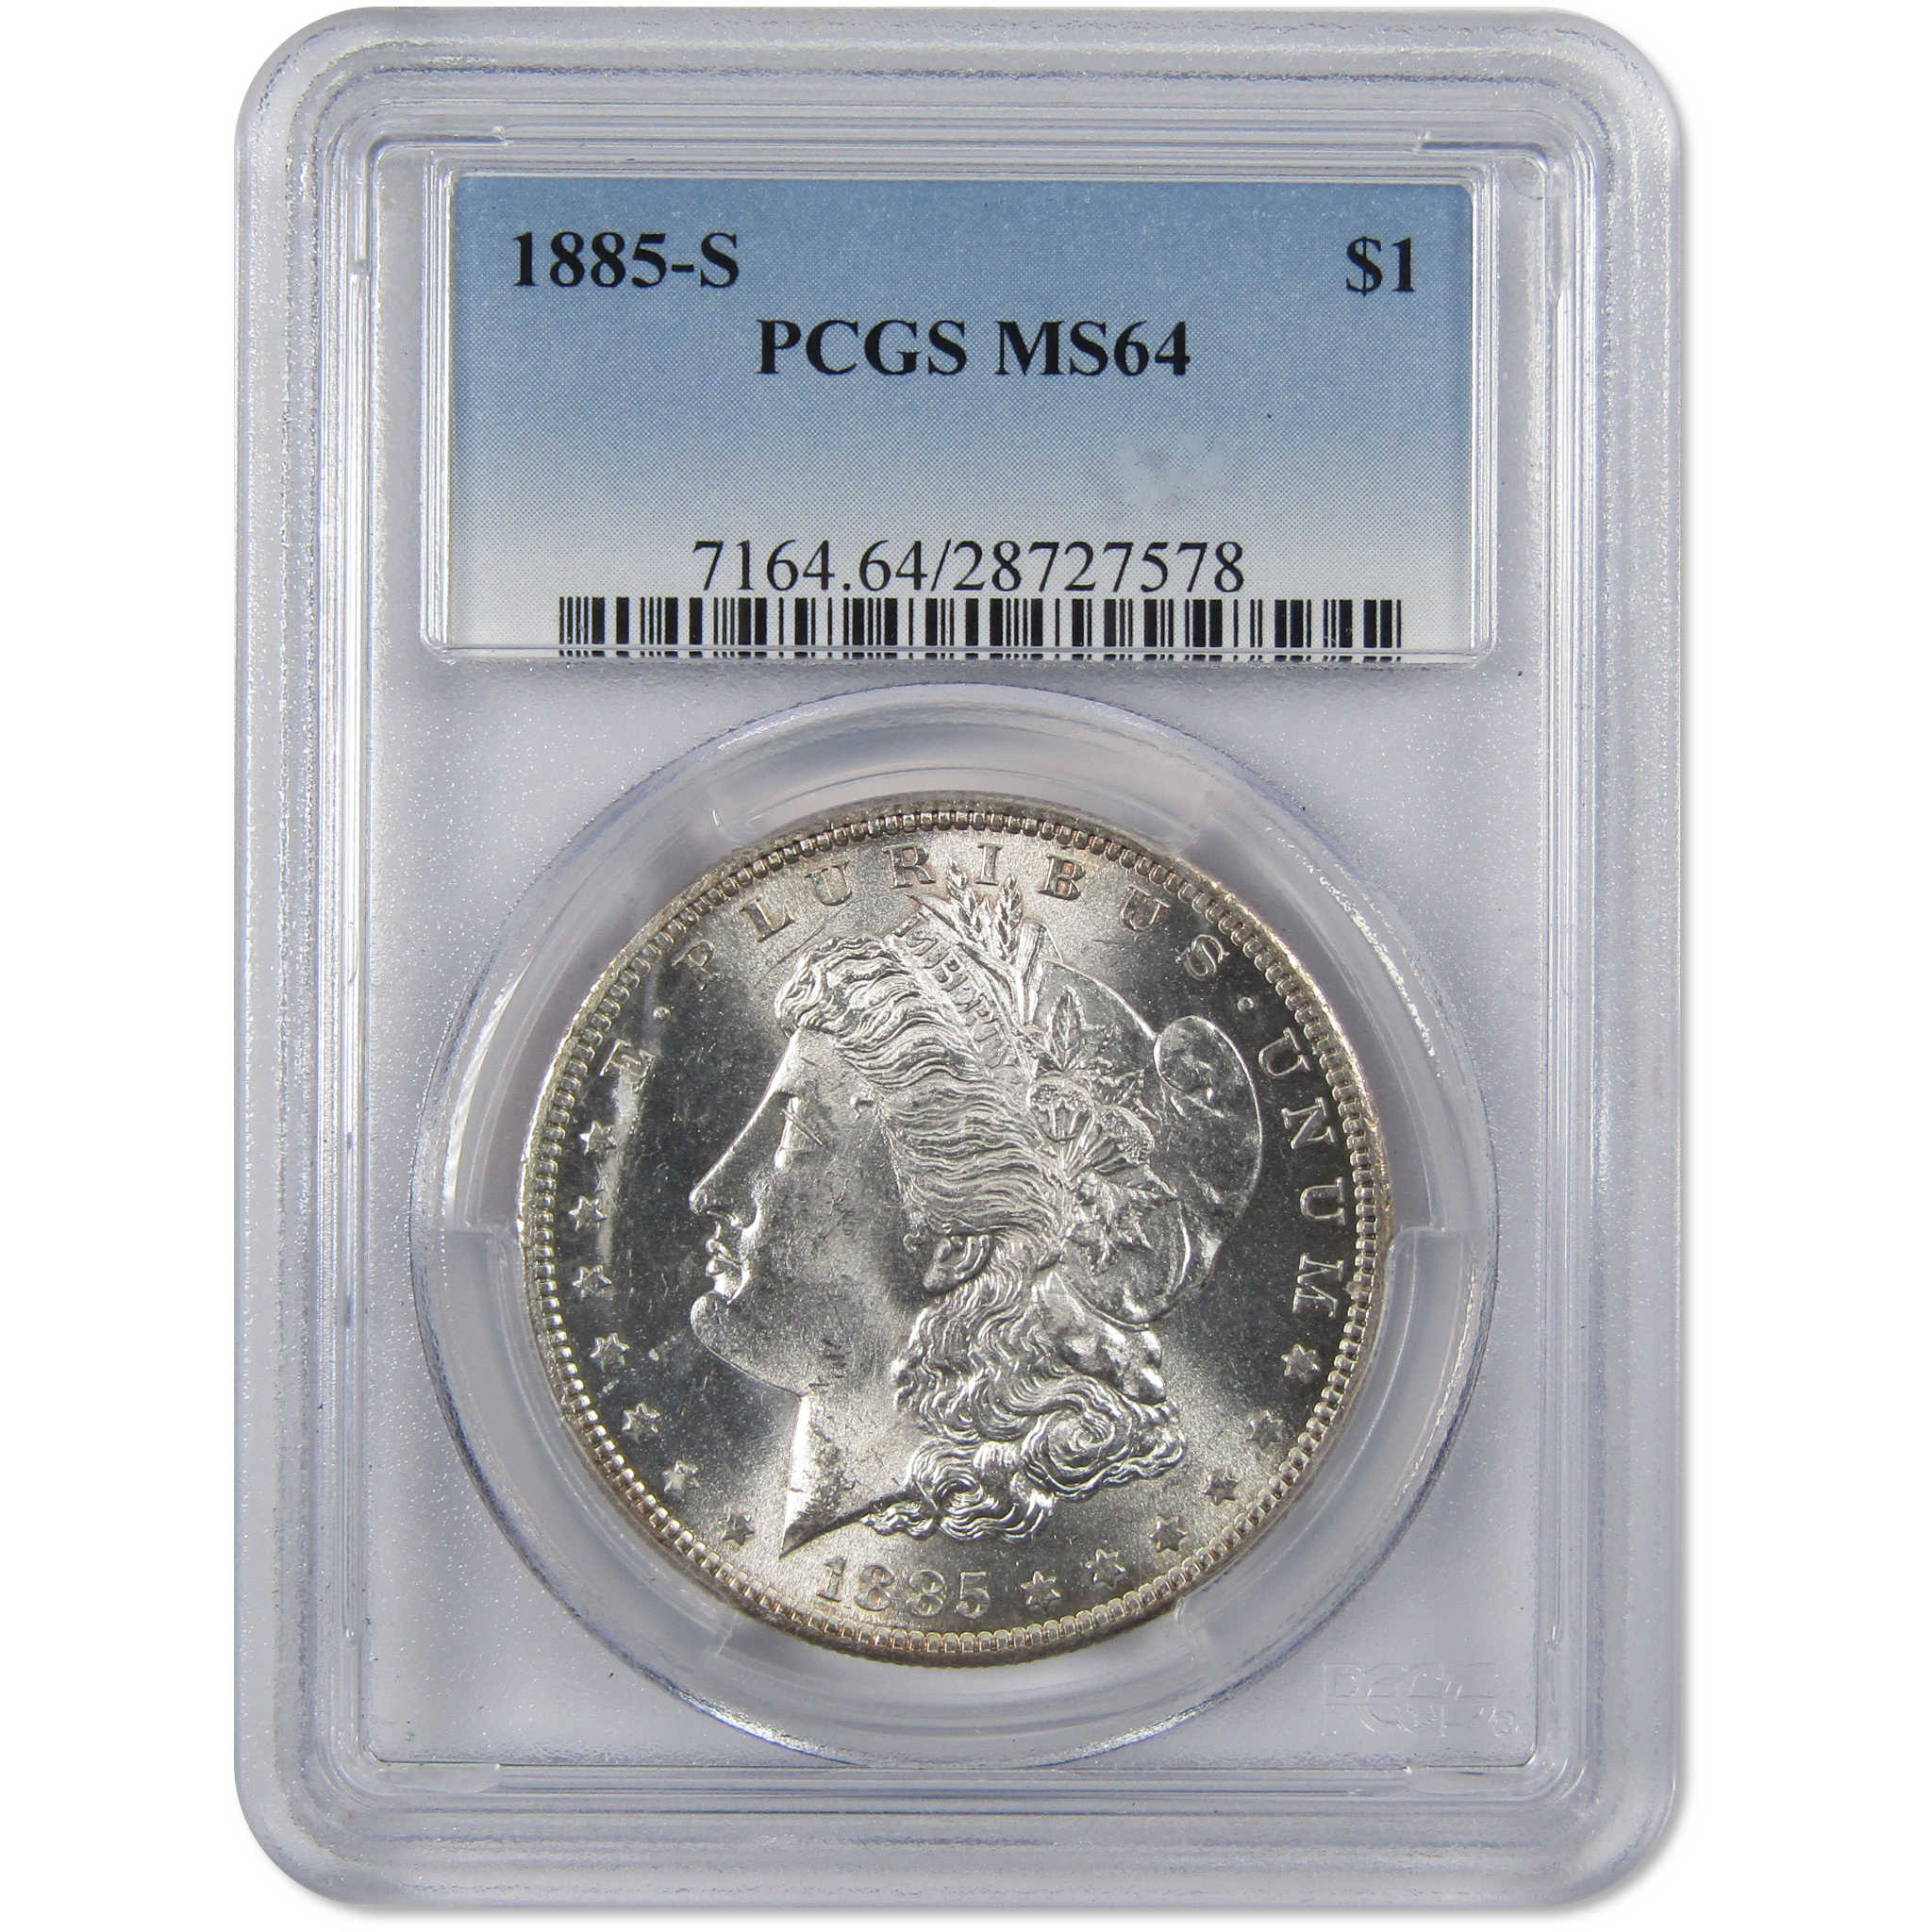 1885 S Morgan Dollar MS 64 PCGS 90% Silver $1 Coin SKU:I9736 - Morgan coin - Morgan silver dollar - Morgan silver dollar for sale - Profile Coins &amp; Collectibles